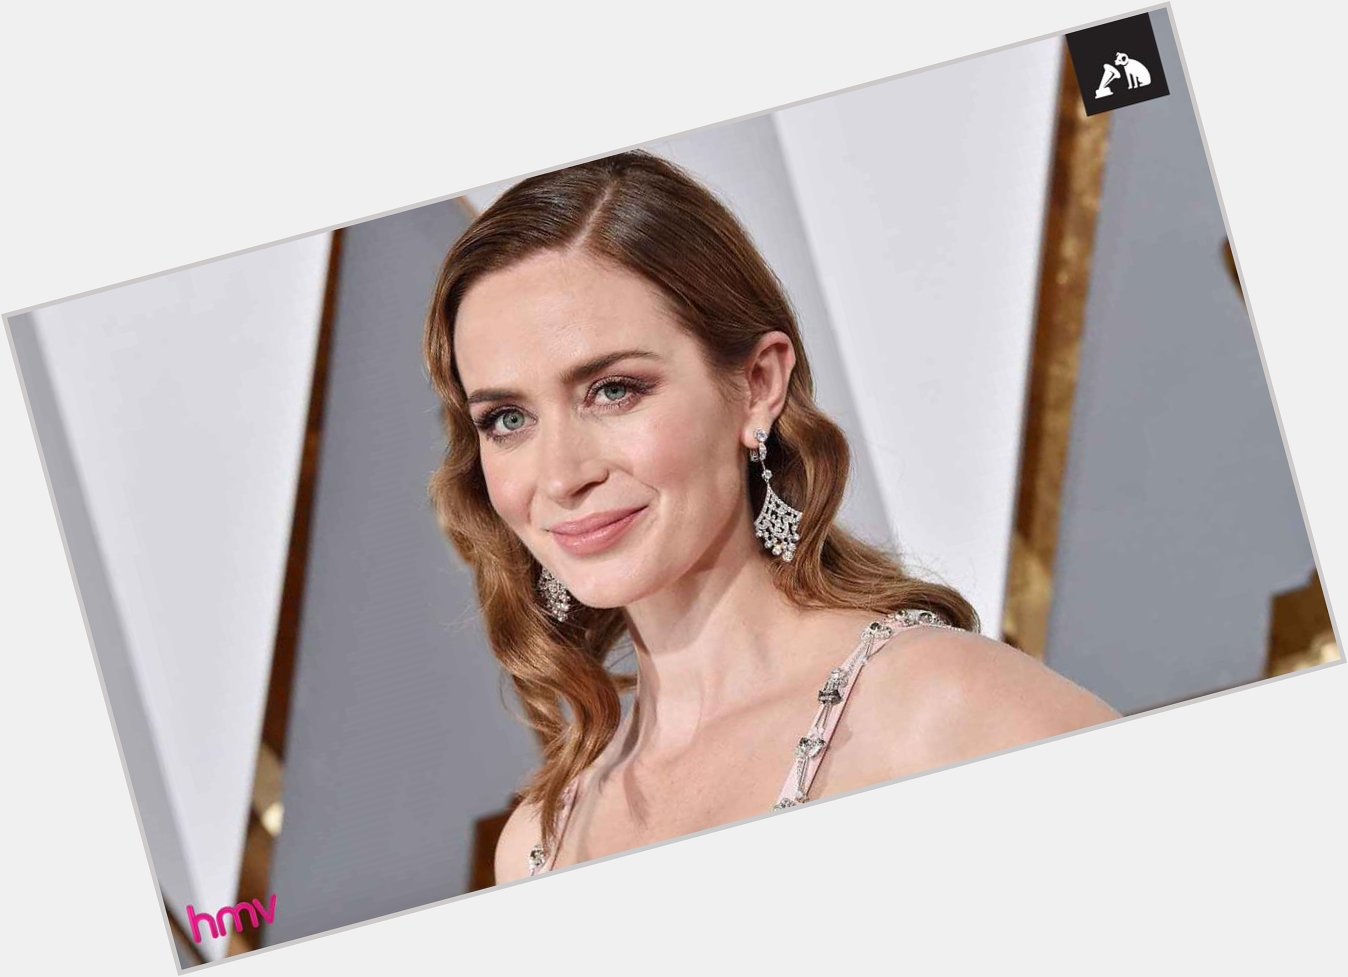 Happy 35th Birthday Emily Blunt!
Which of her films are your favourite? 